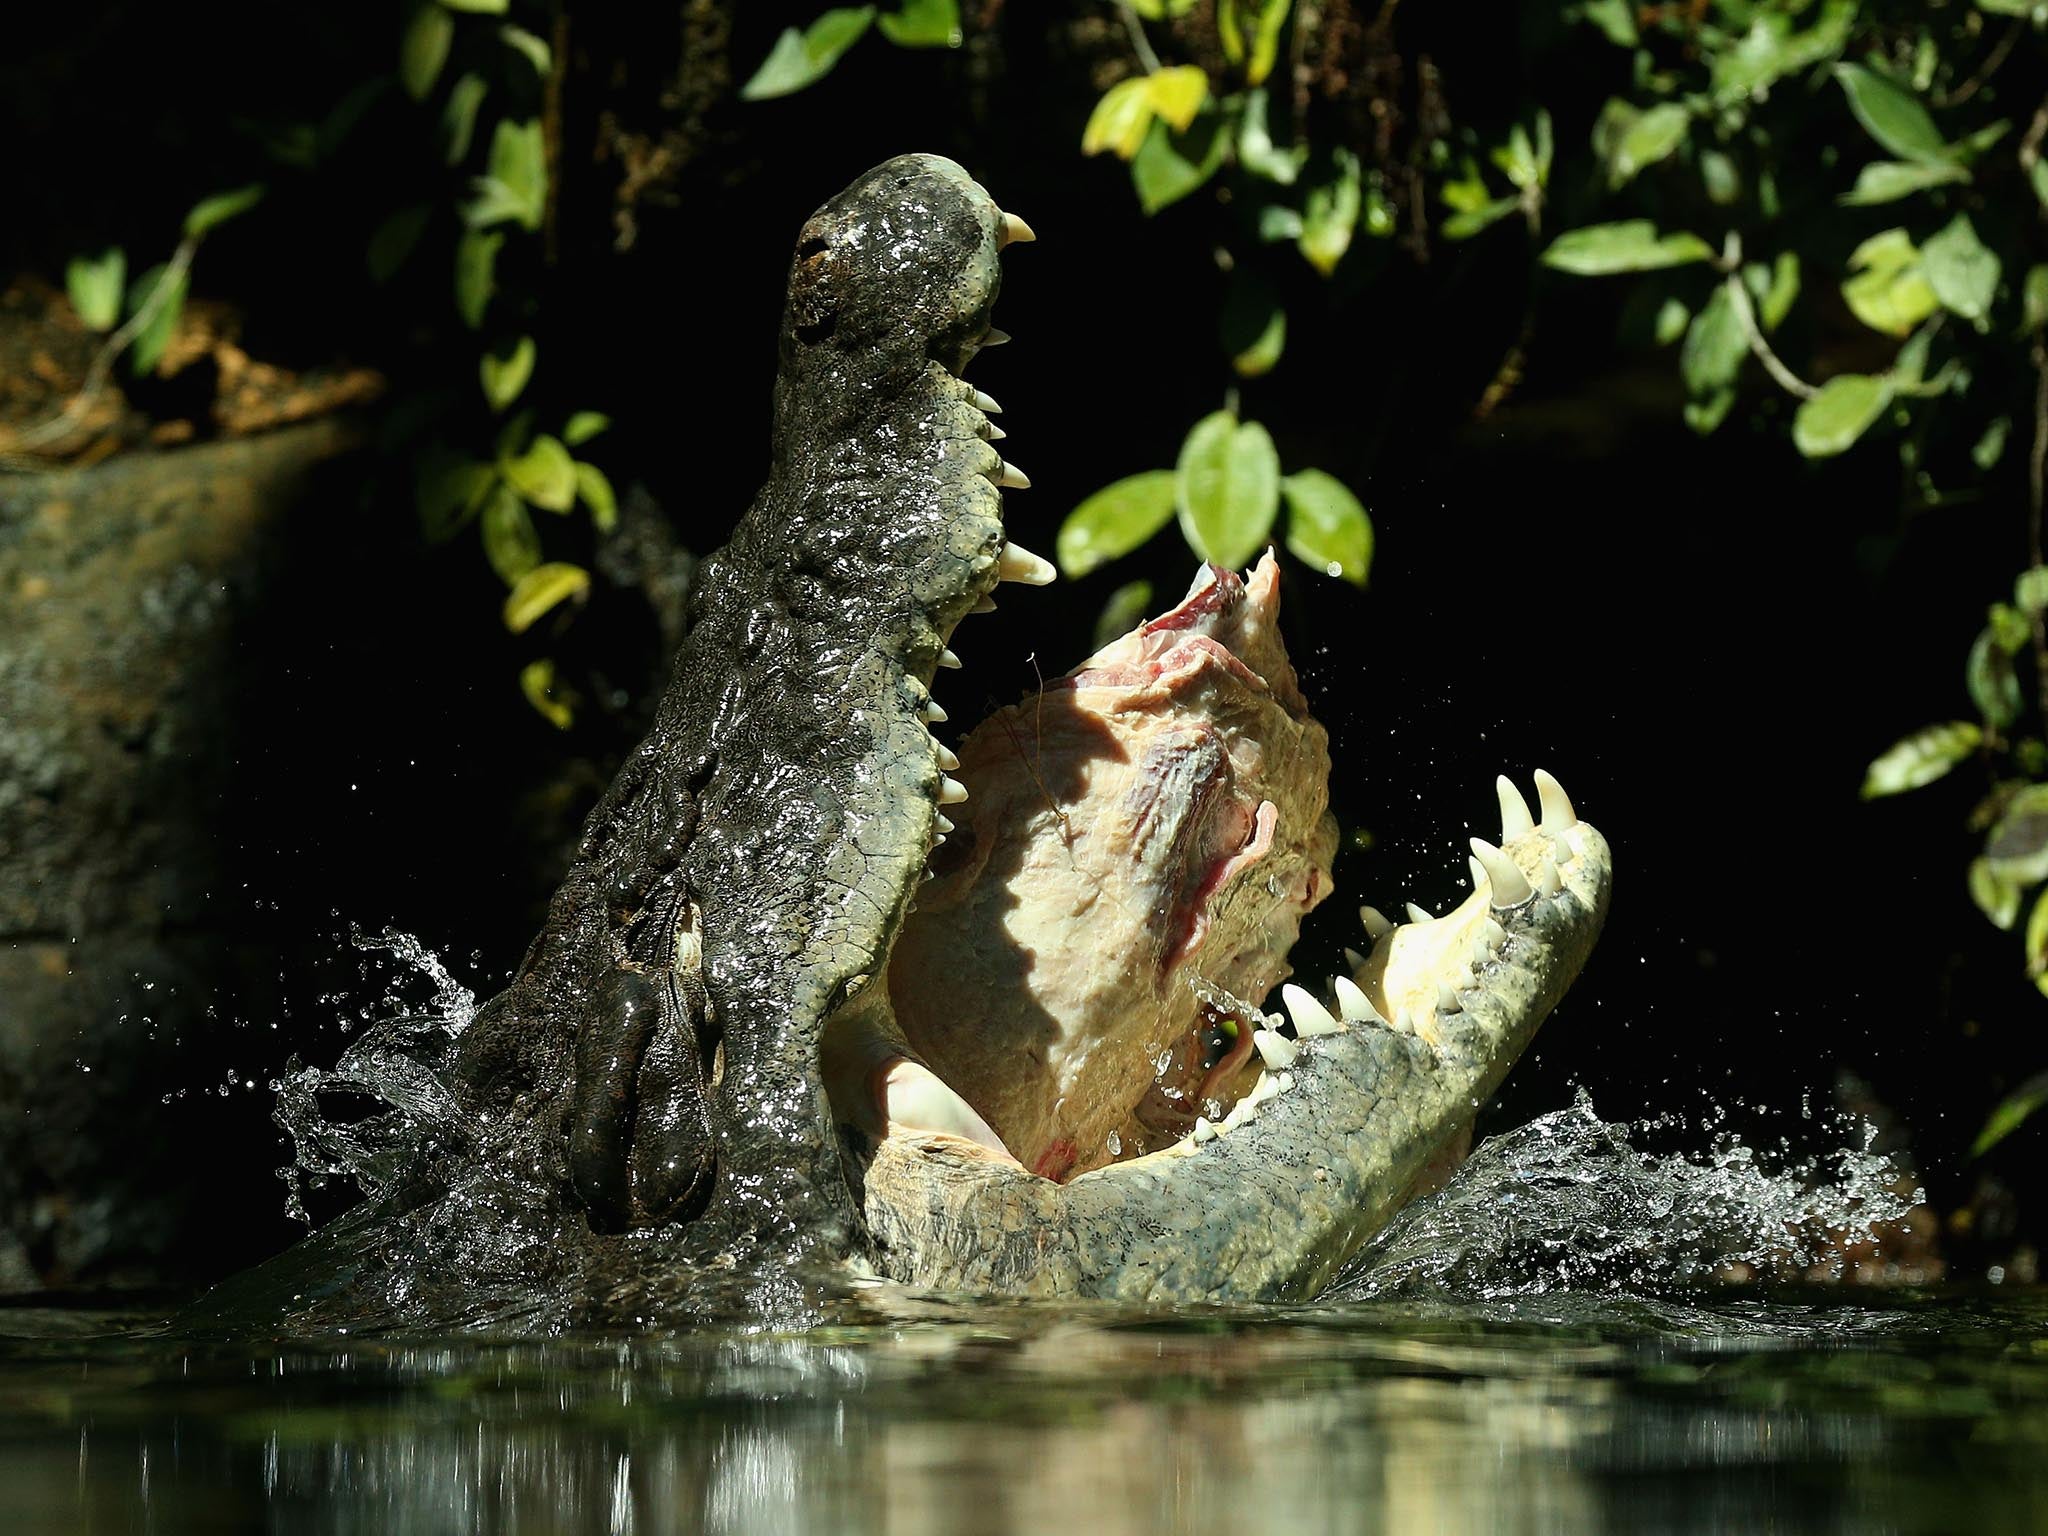 After poaching was banned in Australia in the 1970s, saltwater crocodile populations exploded